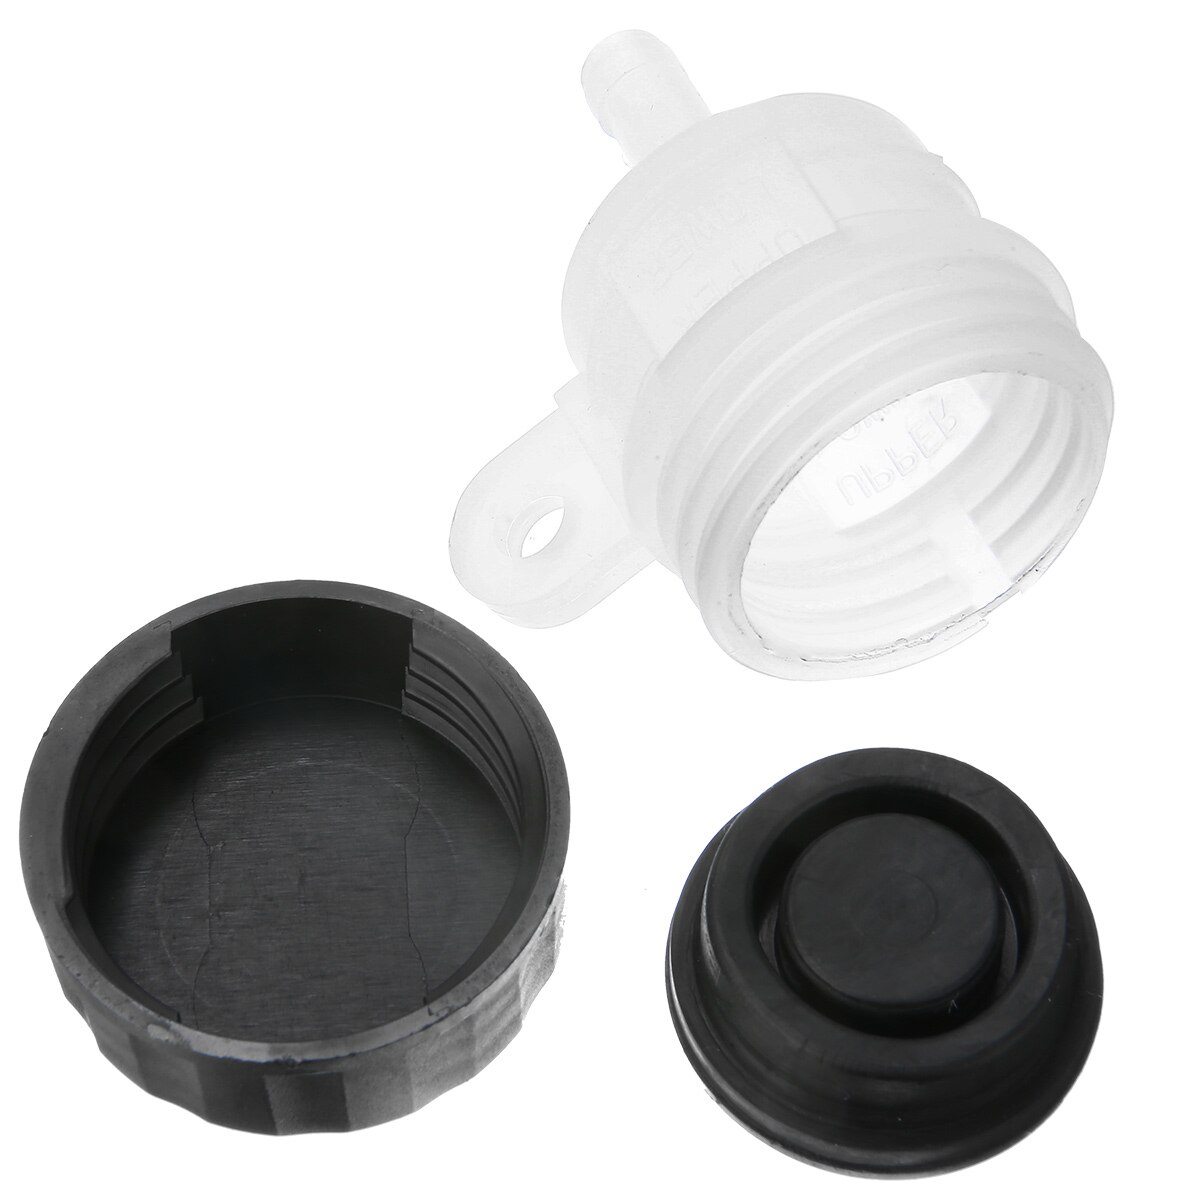 1pc Motorcycle Foot Rear Brake Master Cylinder Tank Oil Cup Fluid Bottle Reservoir Accessories Parts